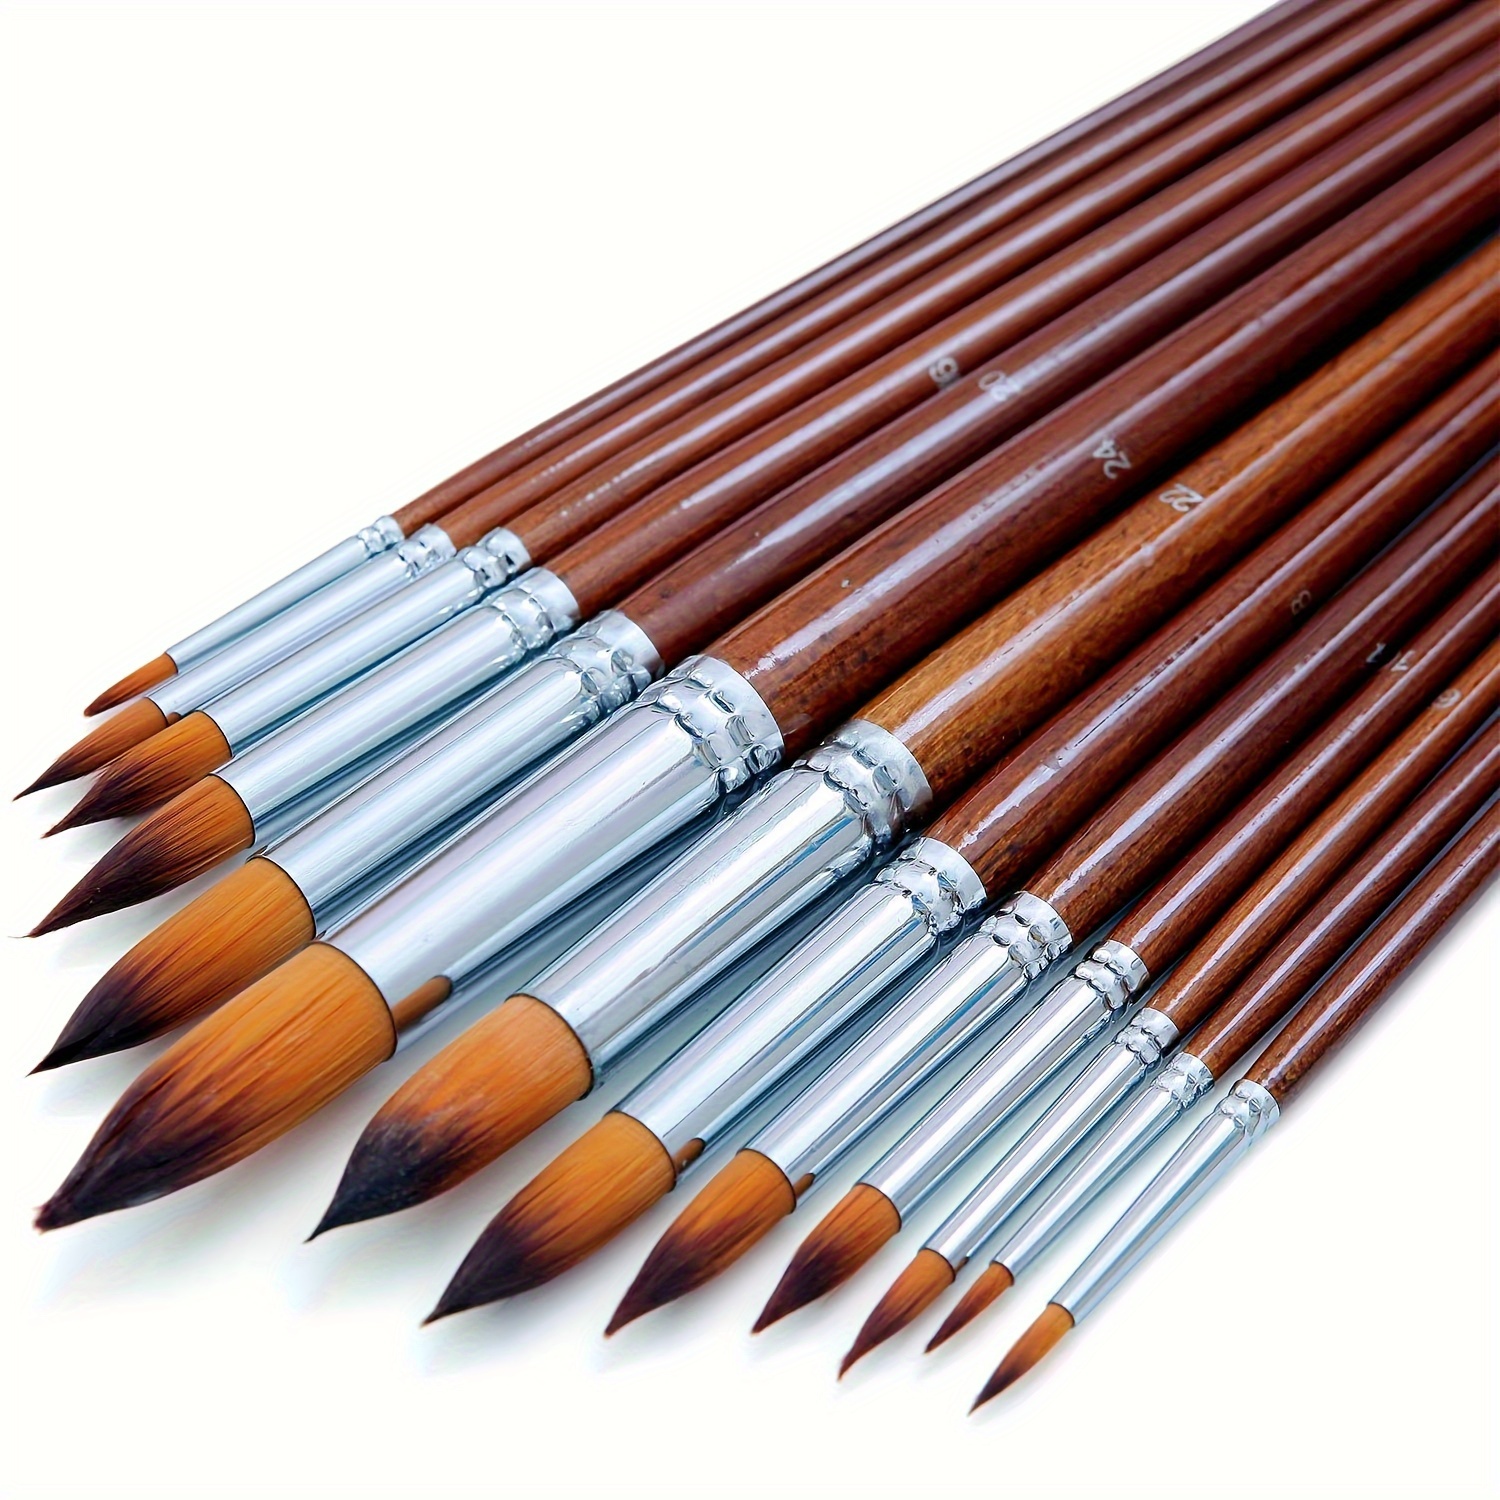 

13pcs Artist Watercolor Paint Brushes Set - Round Pointed Tip Soft Anti-shedding Nylon Hair Wood Long Handle - Detail Paint Brush For Watercolor, Acrylics, Ink, Gouache, Oil, Tempera, Paint By Numbers